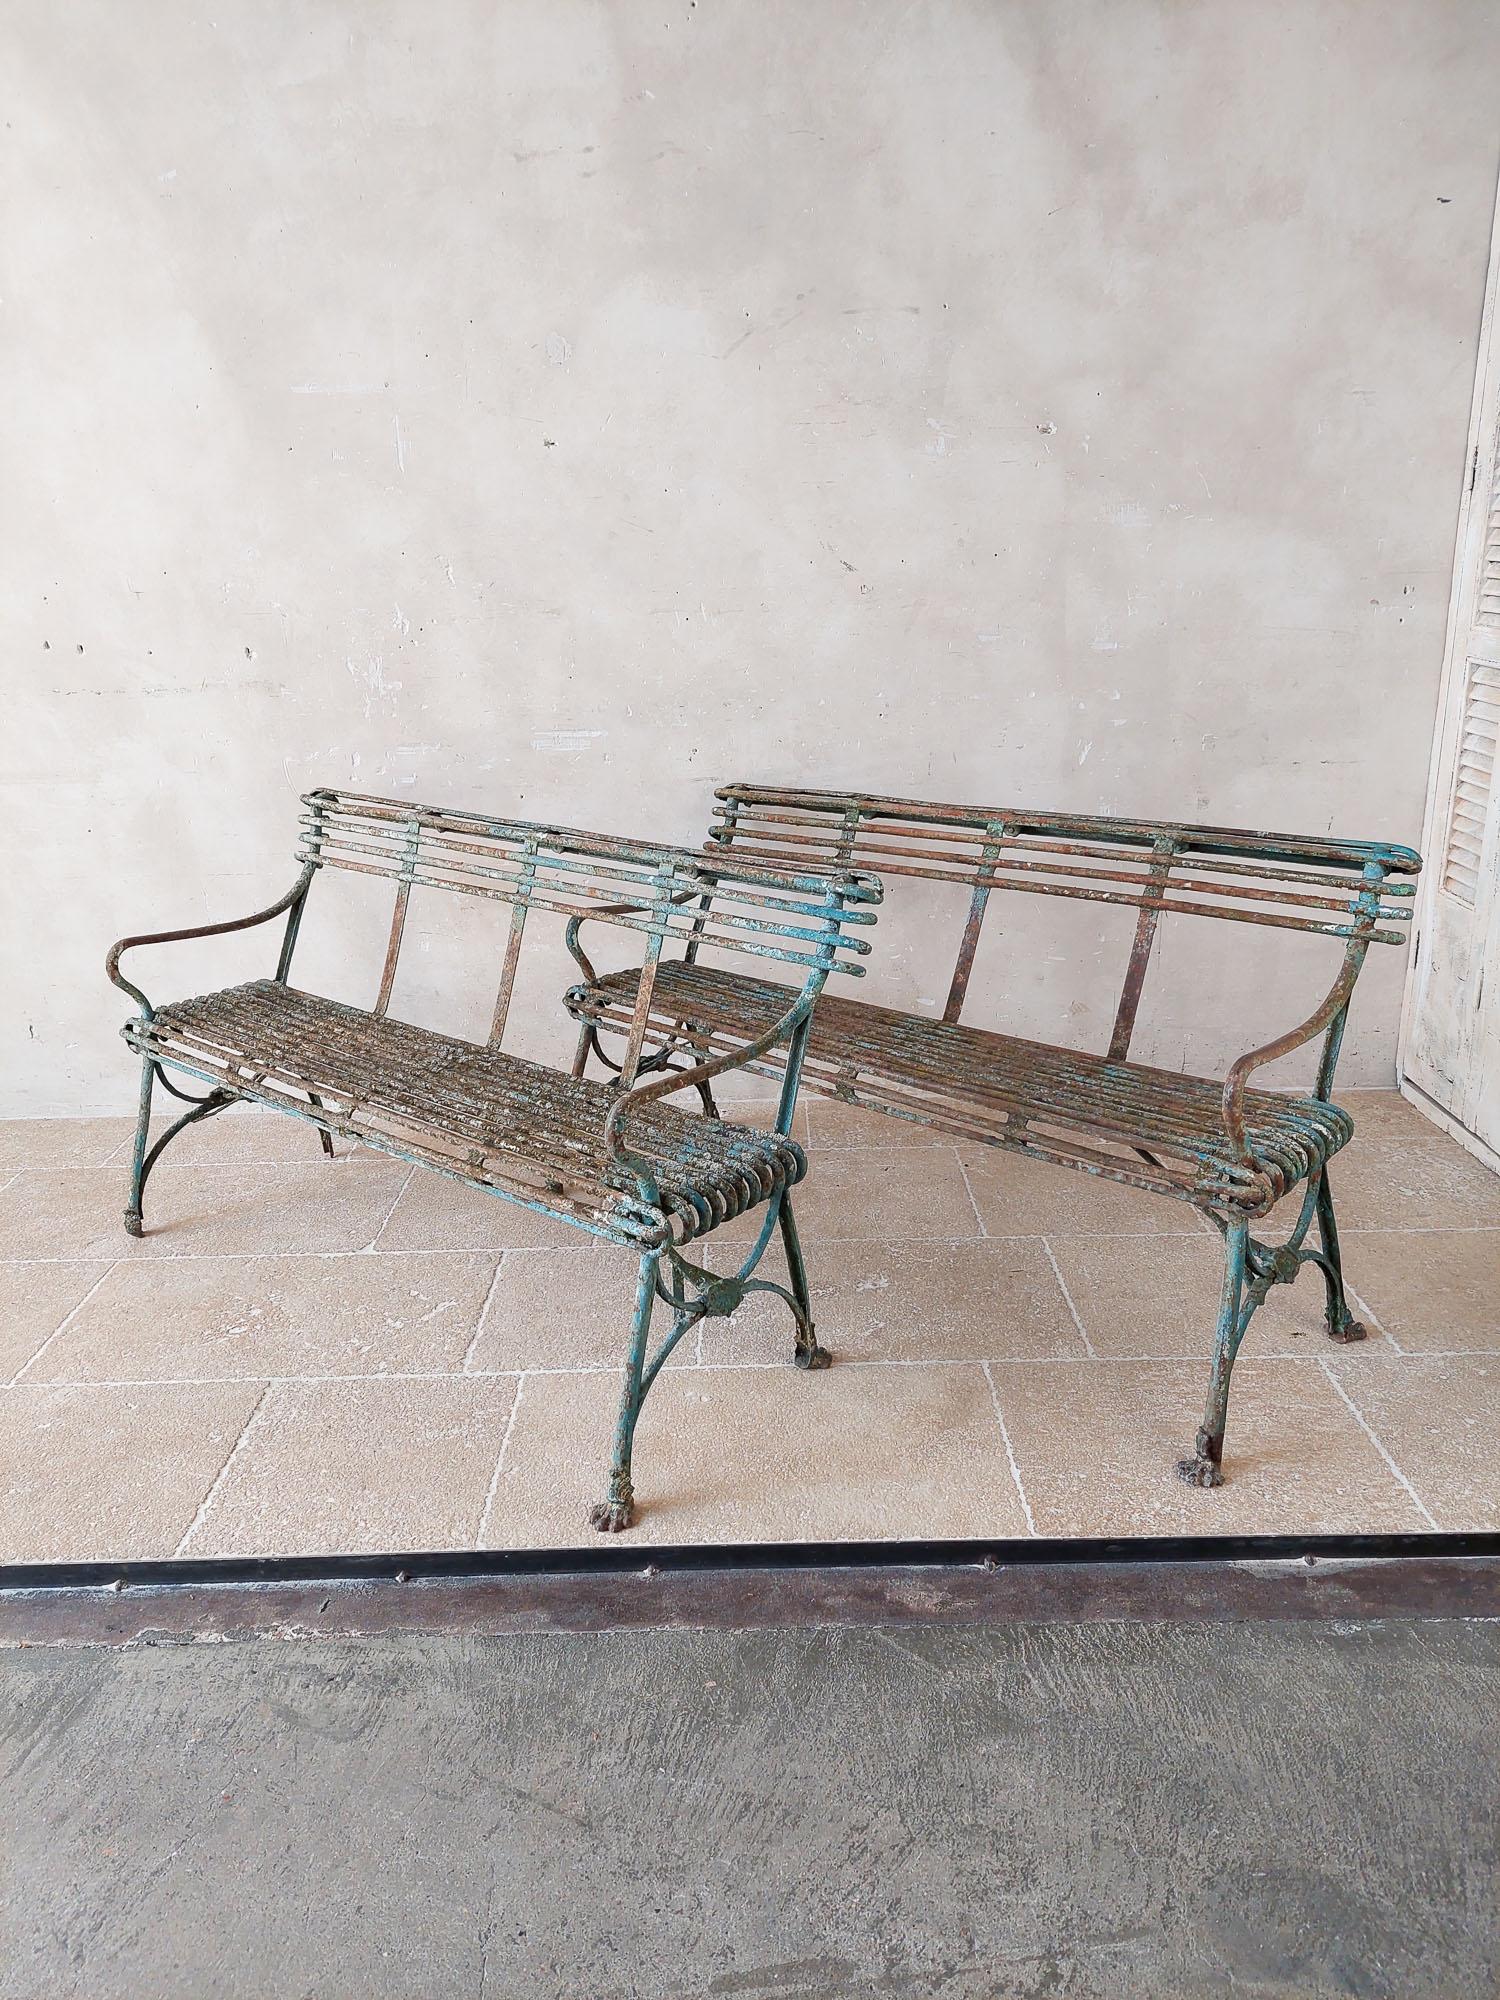 Pair of antique Arras garden benches with claw feet, and original worn green patina. From the 19th Century. Some claw feet are missing due to age.

h 75 x w 140 x d 50 cm

The French antique garden furniture style Arras is named after the town where